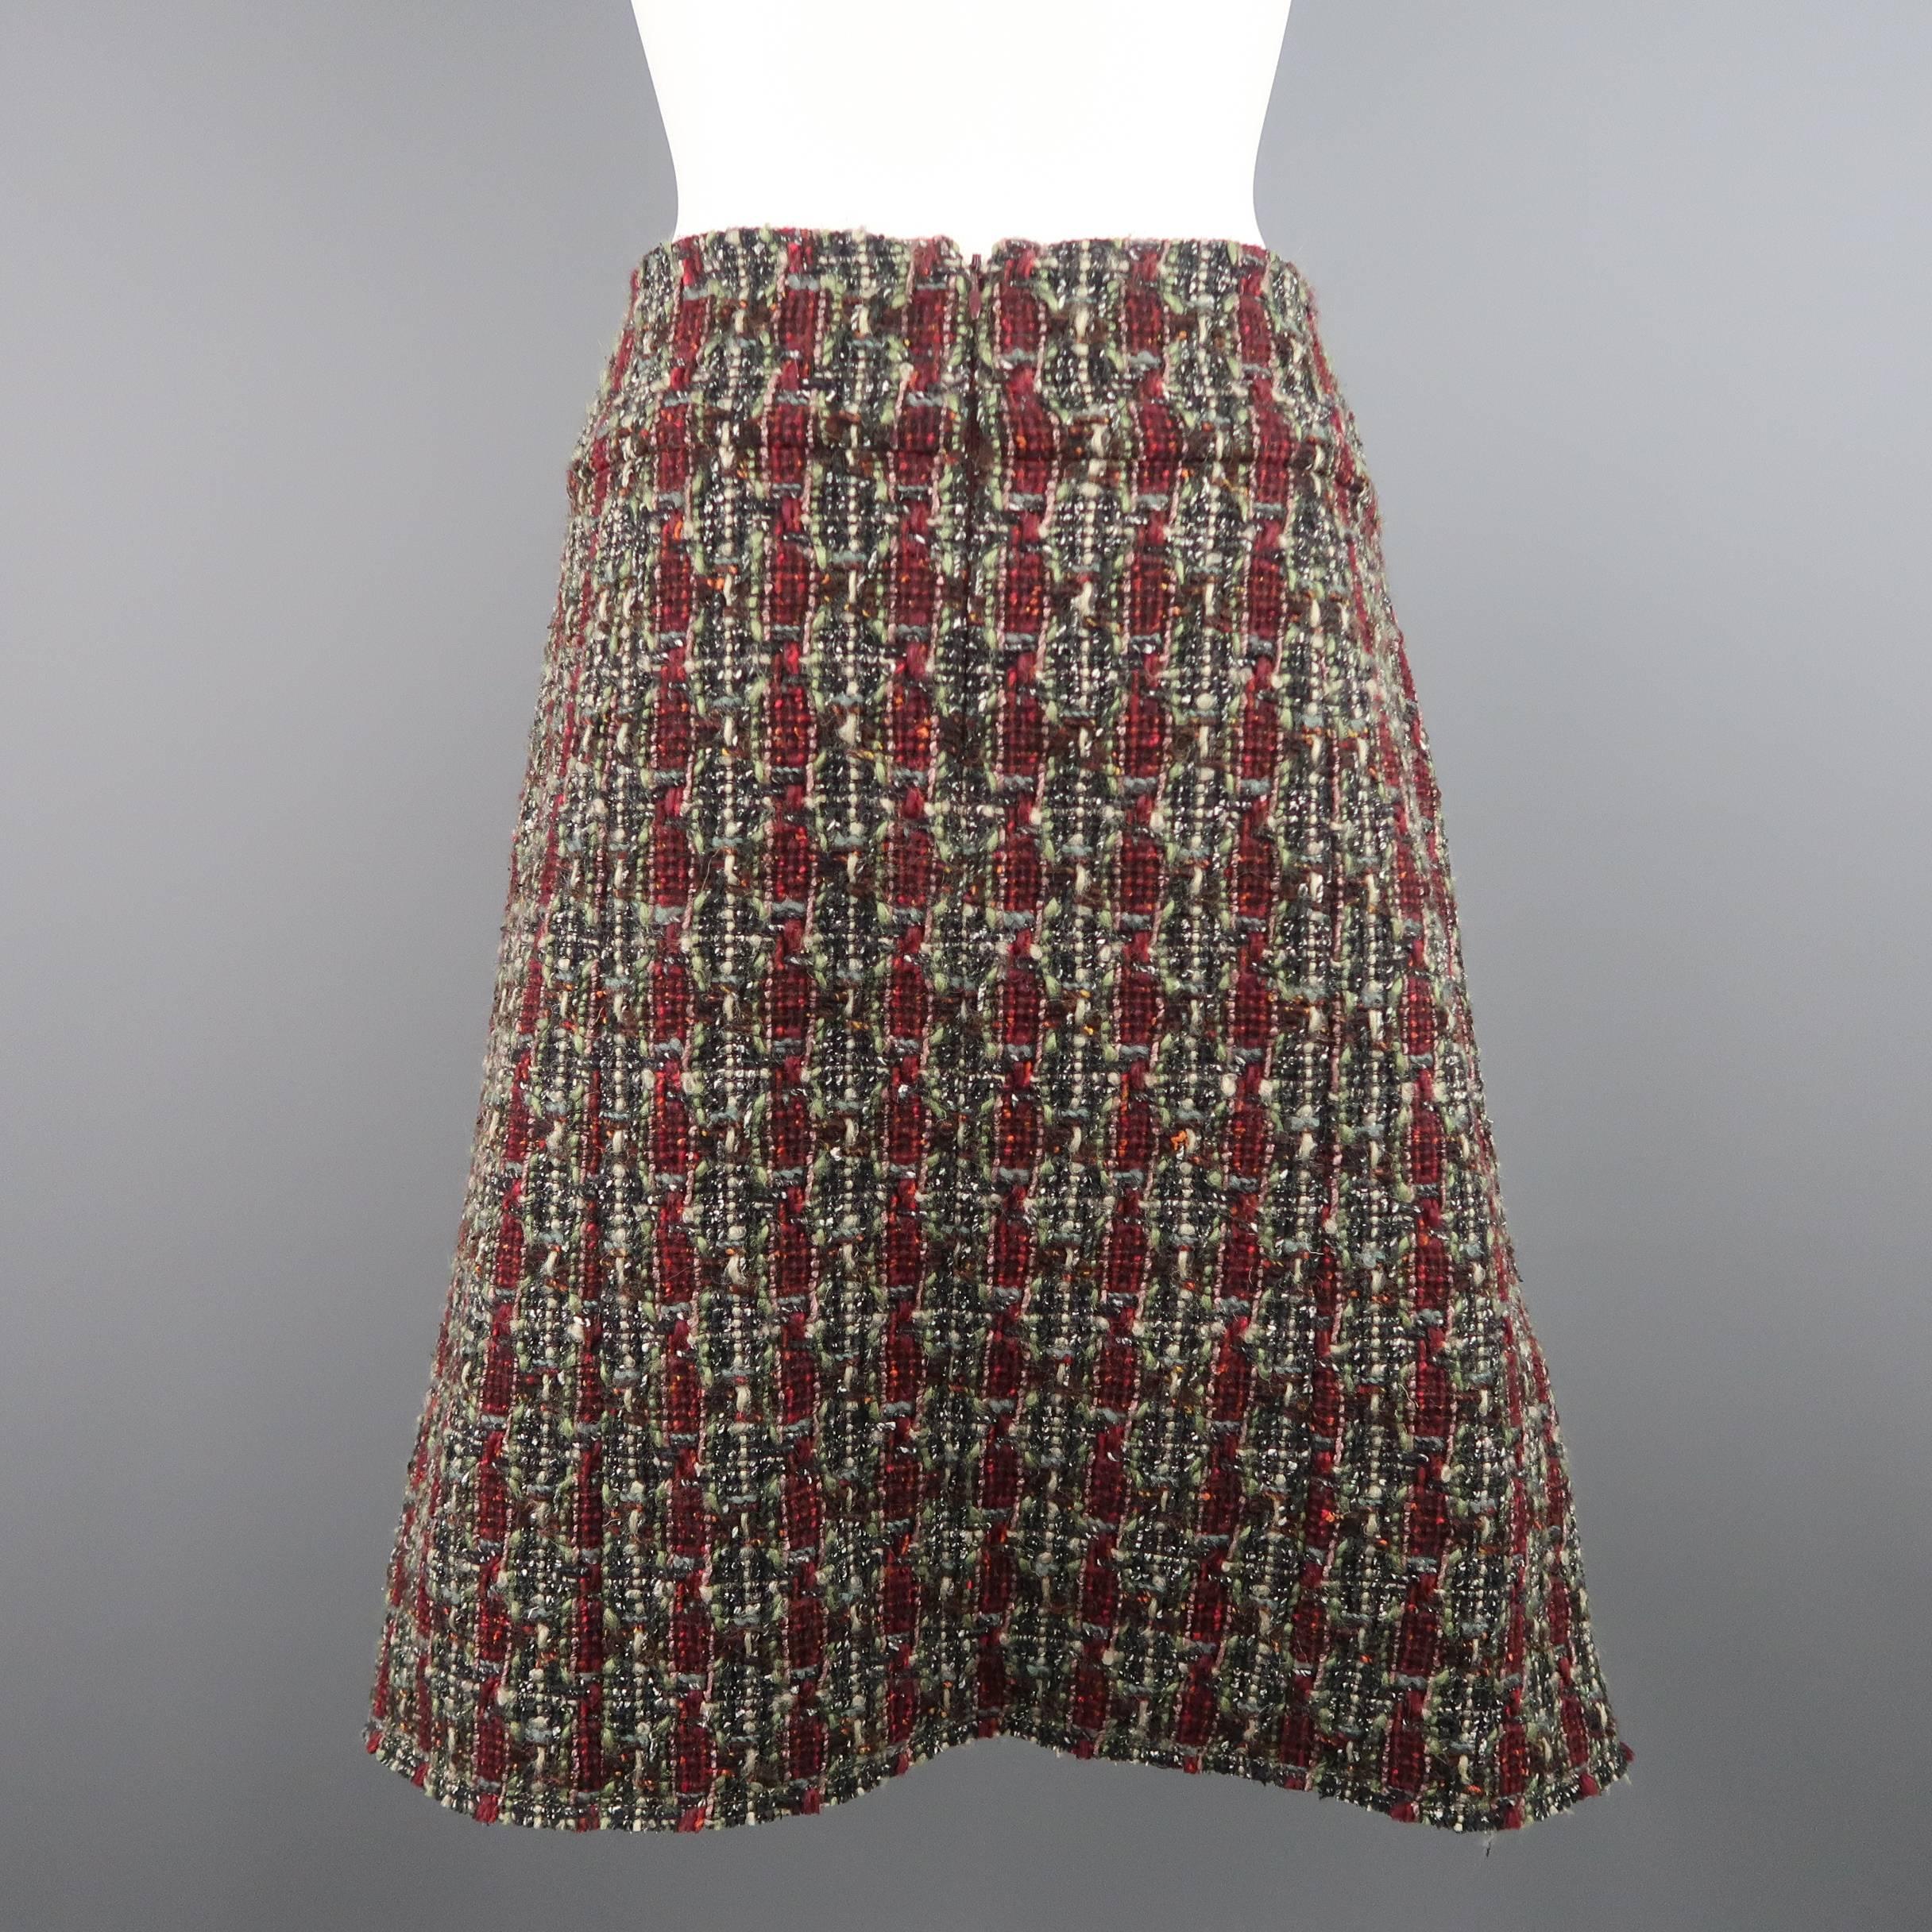 Red CHANEL Skirt - Size 14 - Burgundy & Green Wool Blend Boucle Tweed A Line Skirt